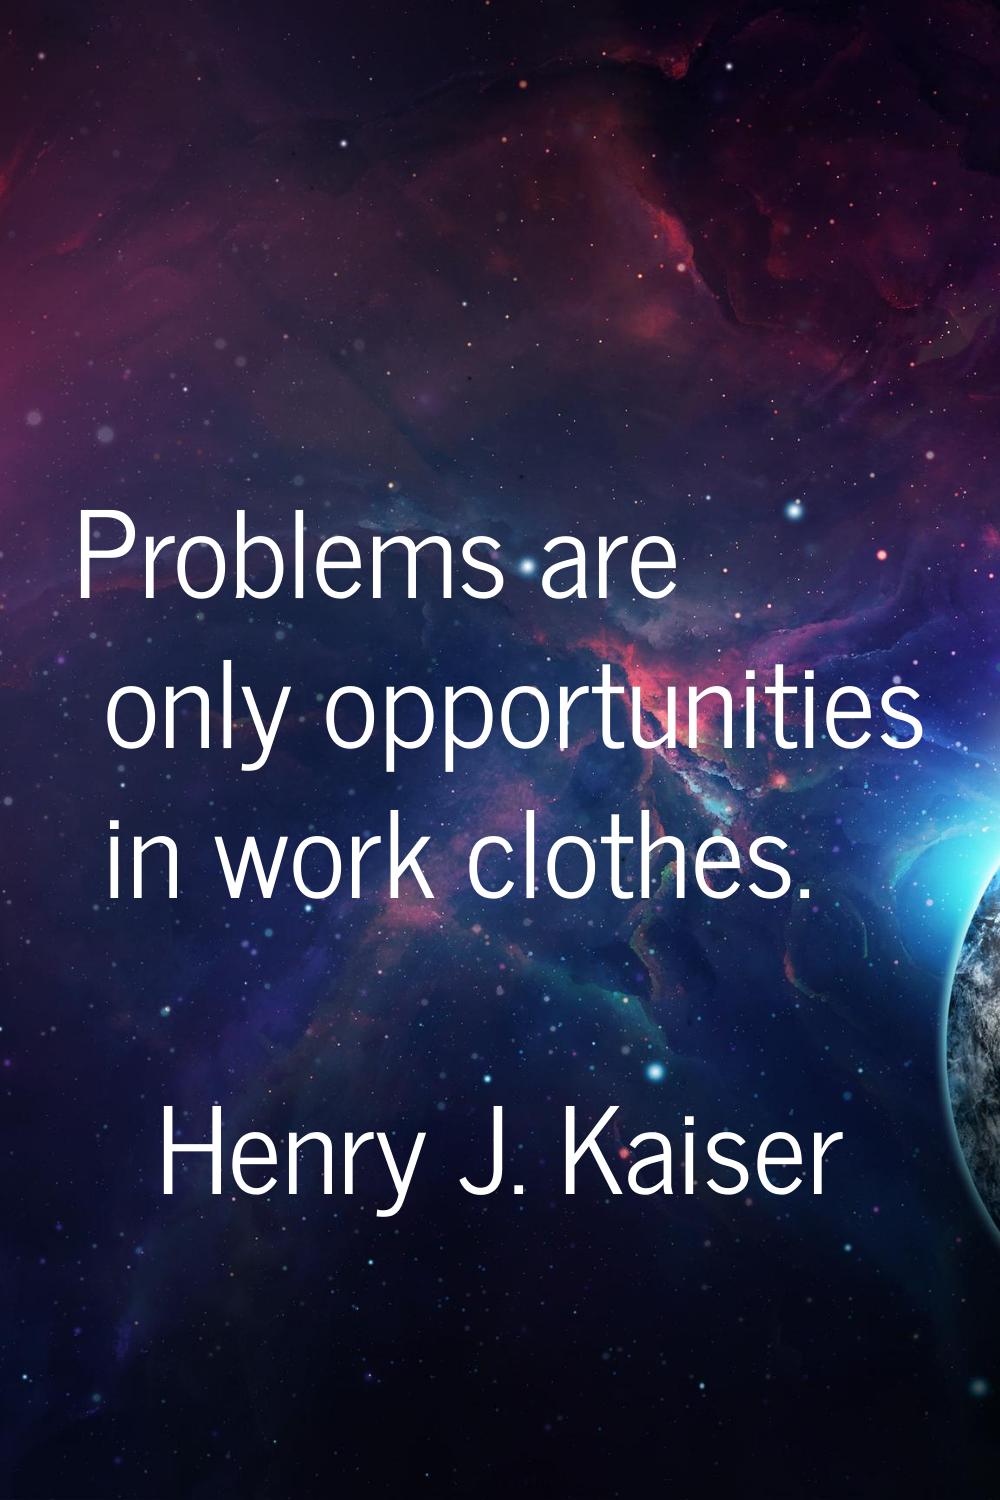 Problems are only opportunities in work clothes.